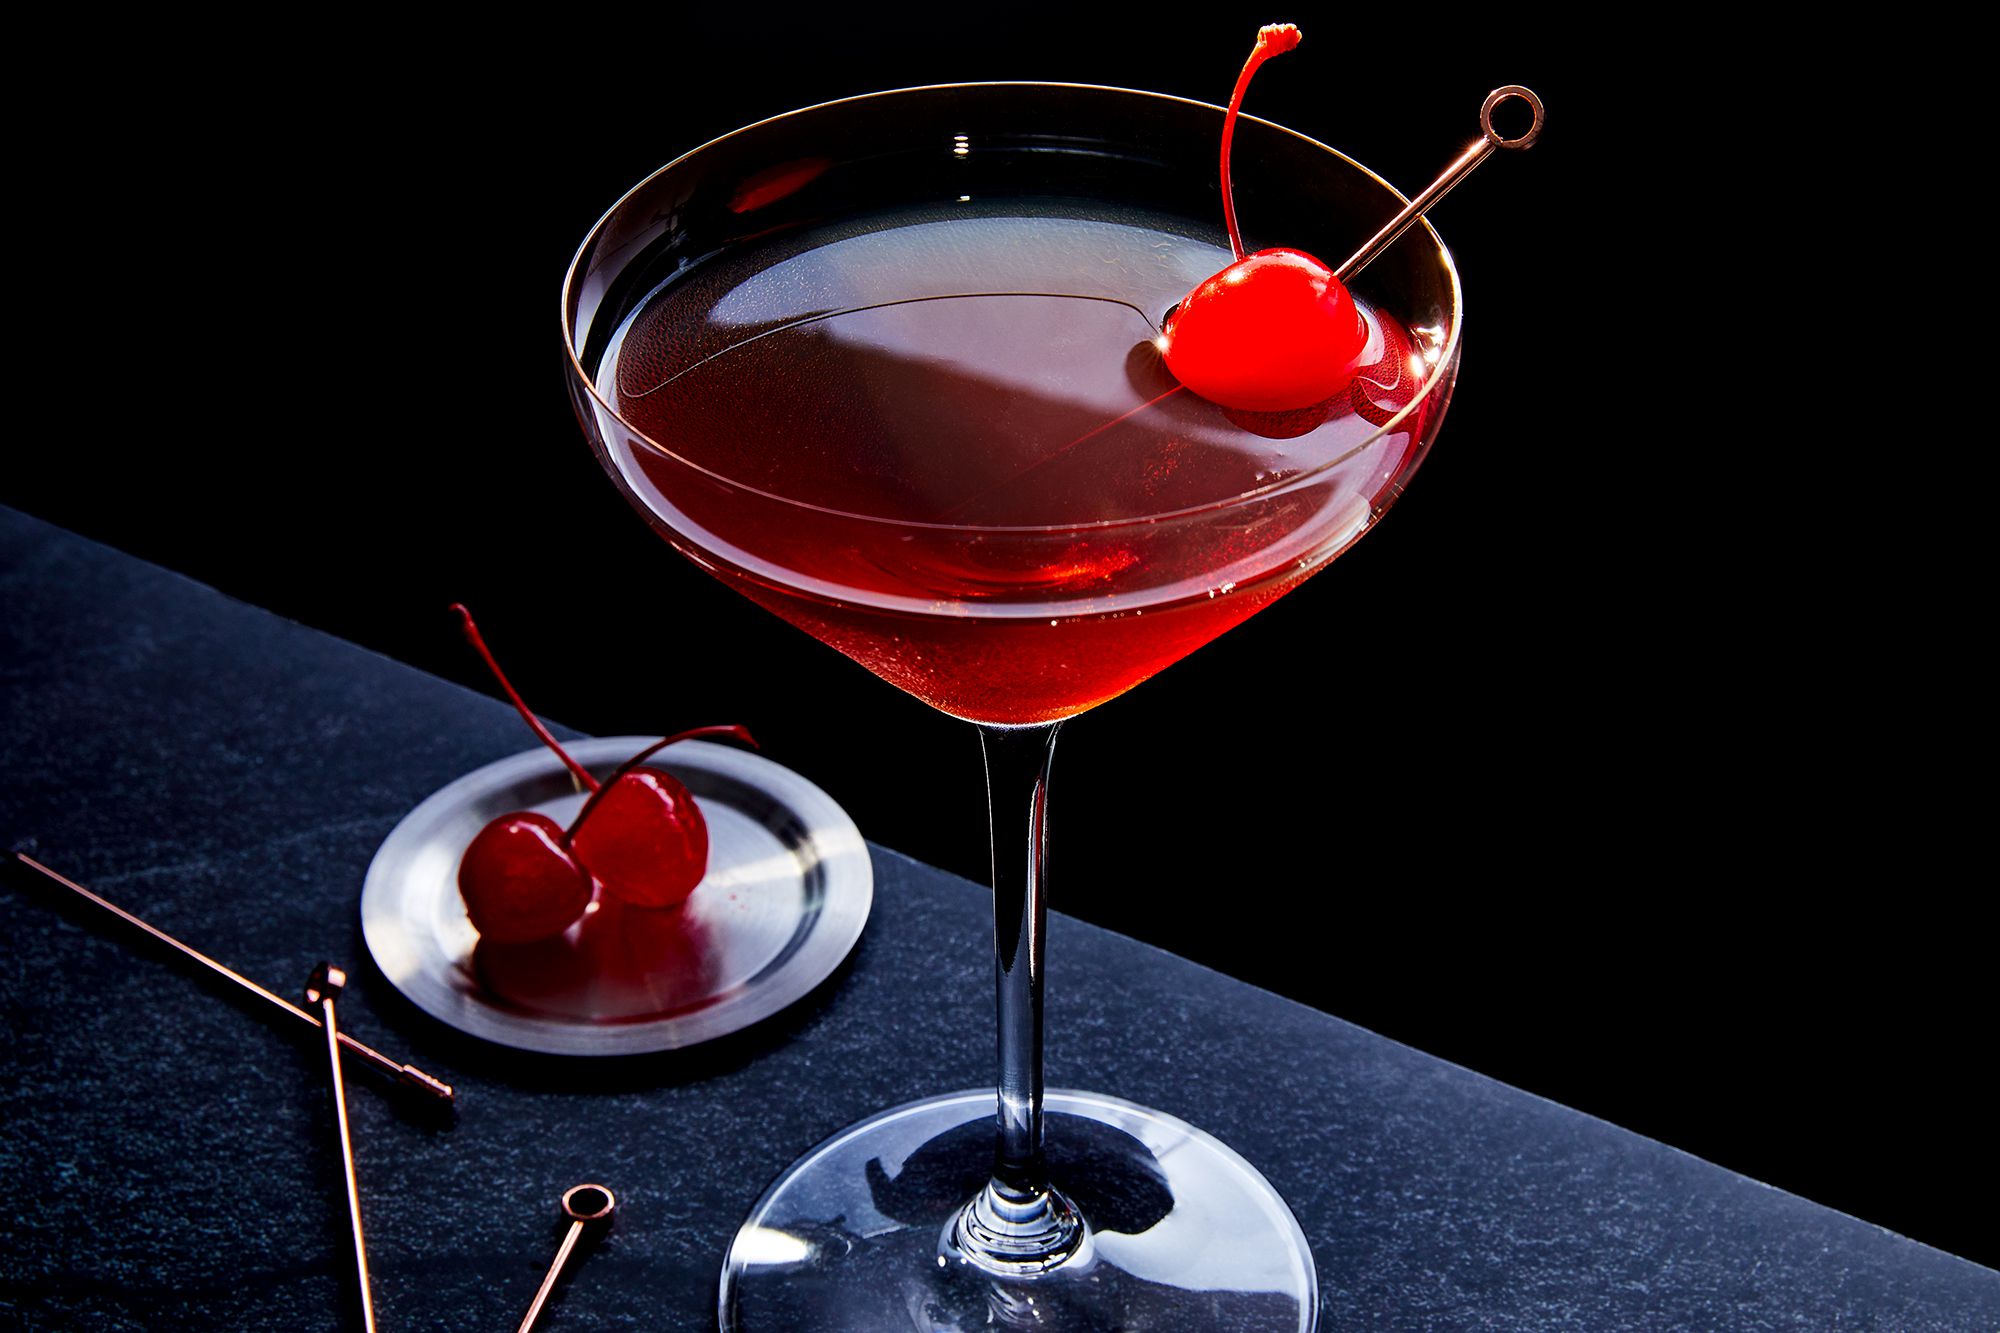 What cherries are good for Manhattans